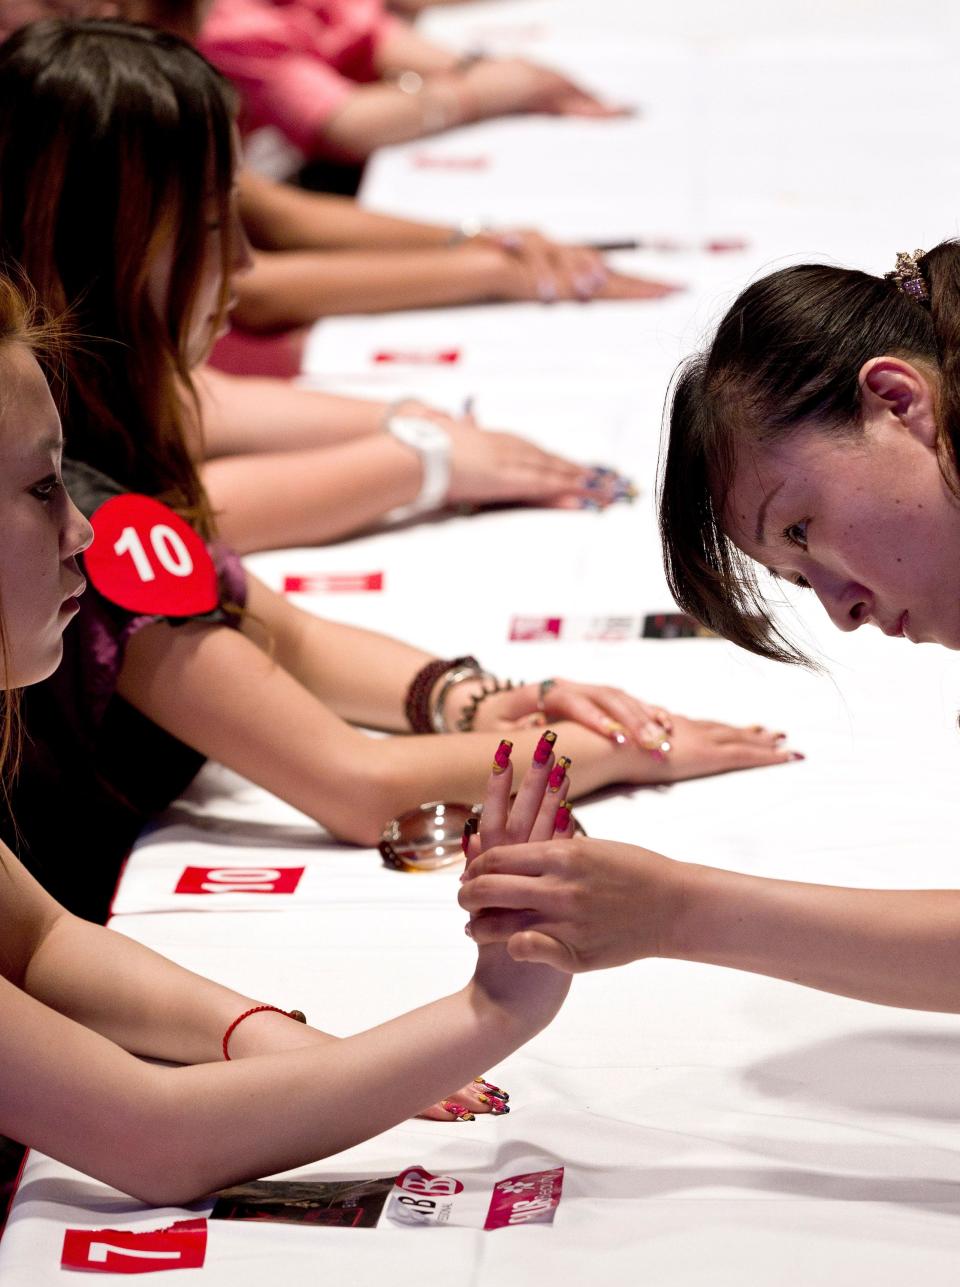 A judge checks on the contestants' nails during a nail art creative design contest at the China 2011 Hair and Beauty exhibition in Beijing, China.